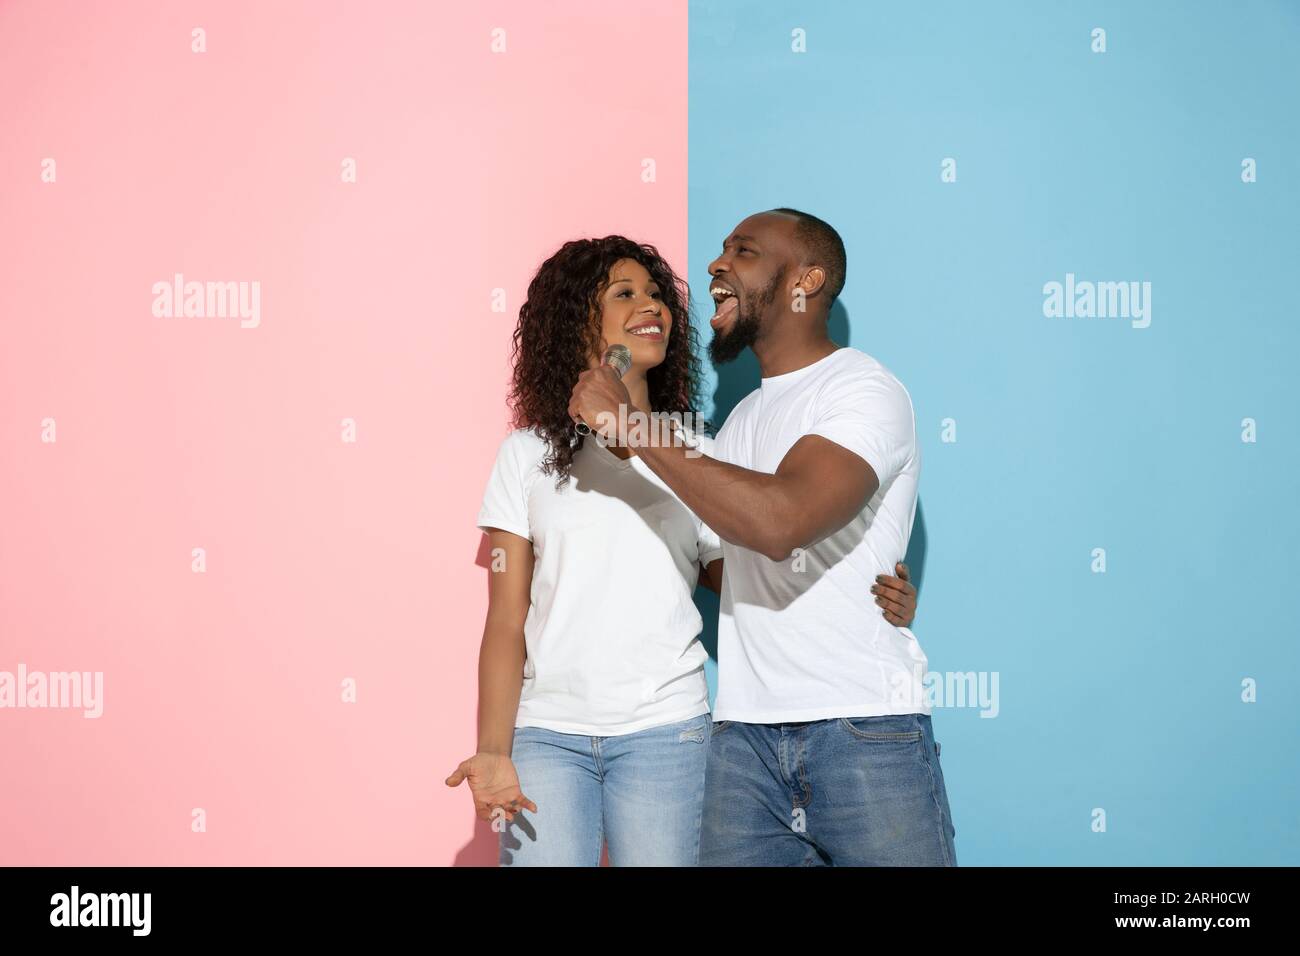 Singing song together. Young man and woman in casual clothes on pink, blue bicolored background. Concept of human emotions, facial expession, relations, ad. Beautiful african-american couple. Stock Photo